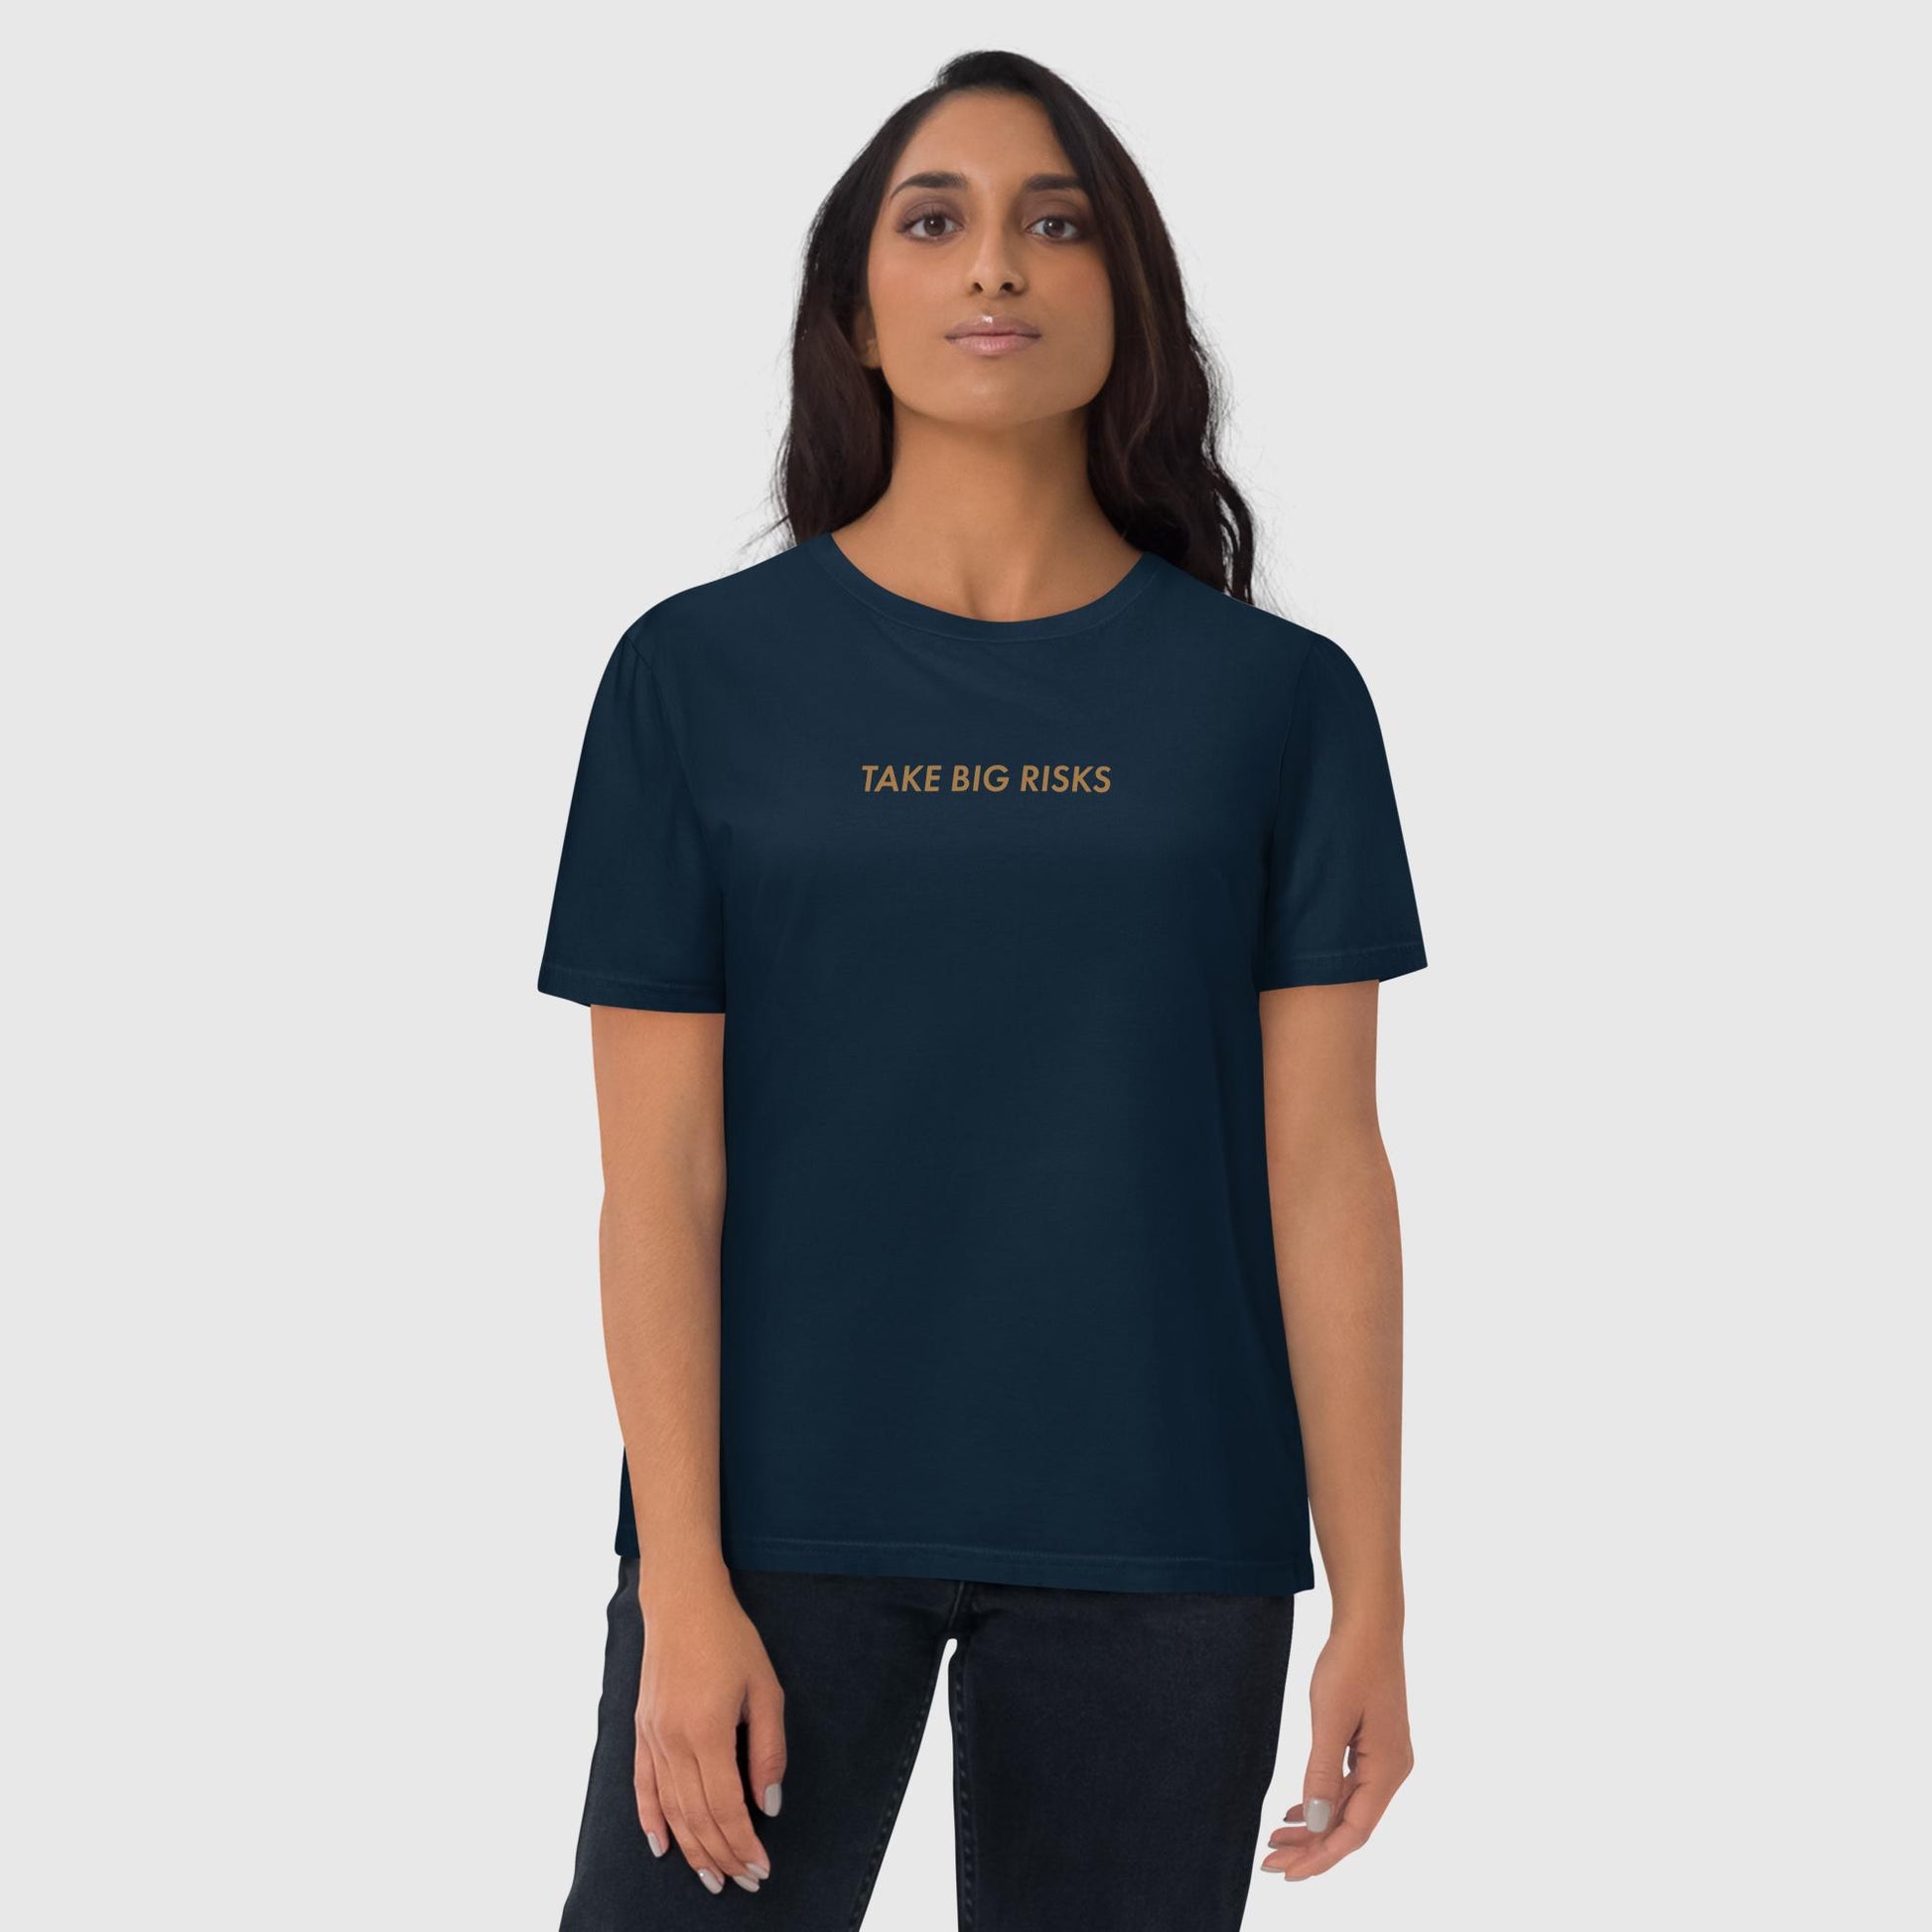 Women's french navy oversized organic cotton t-shirt that features Bill Gates' quote on success, "Take Big Risks." 